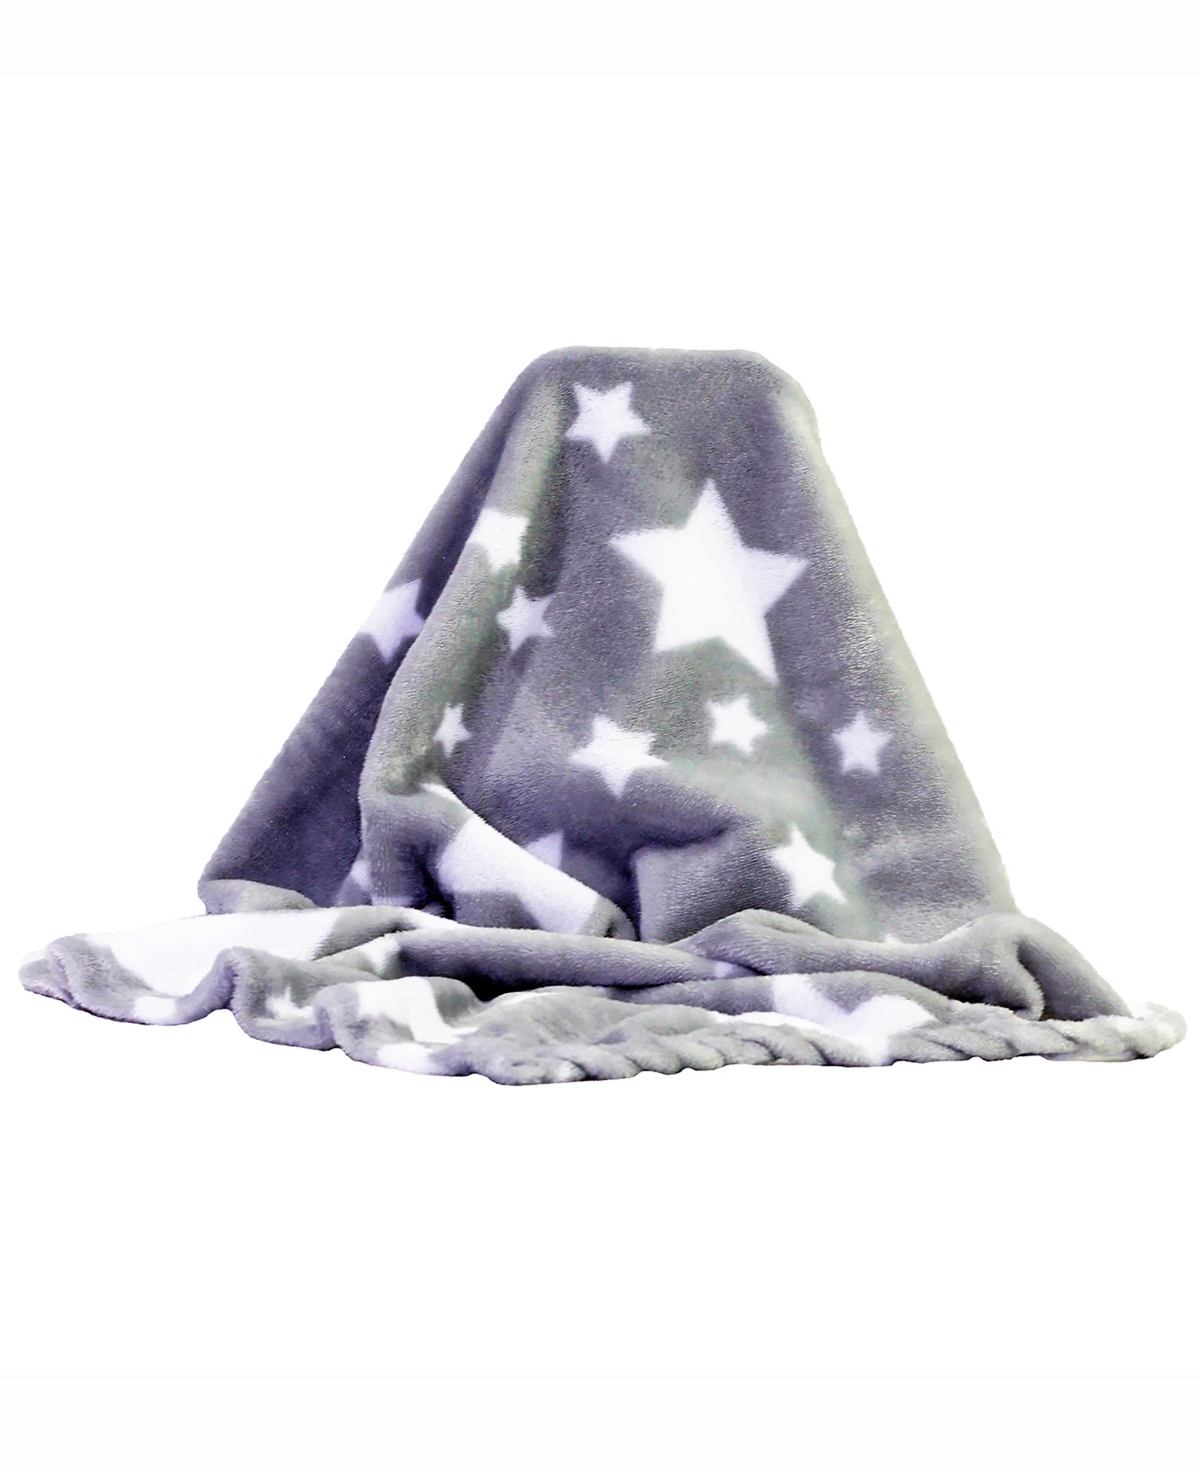 Shop Tendertyme Baby Boys Or Baby Girls Stars Nursery Blanket Collection, 7 Piece Set In Gray And White